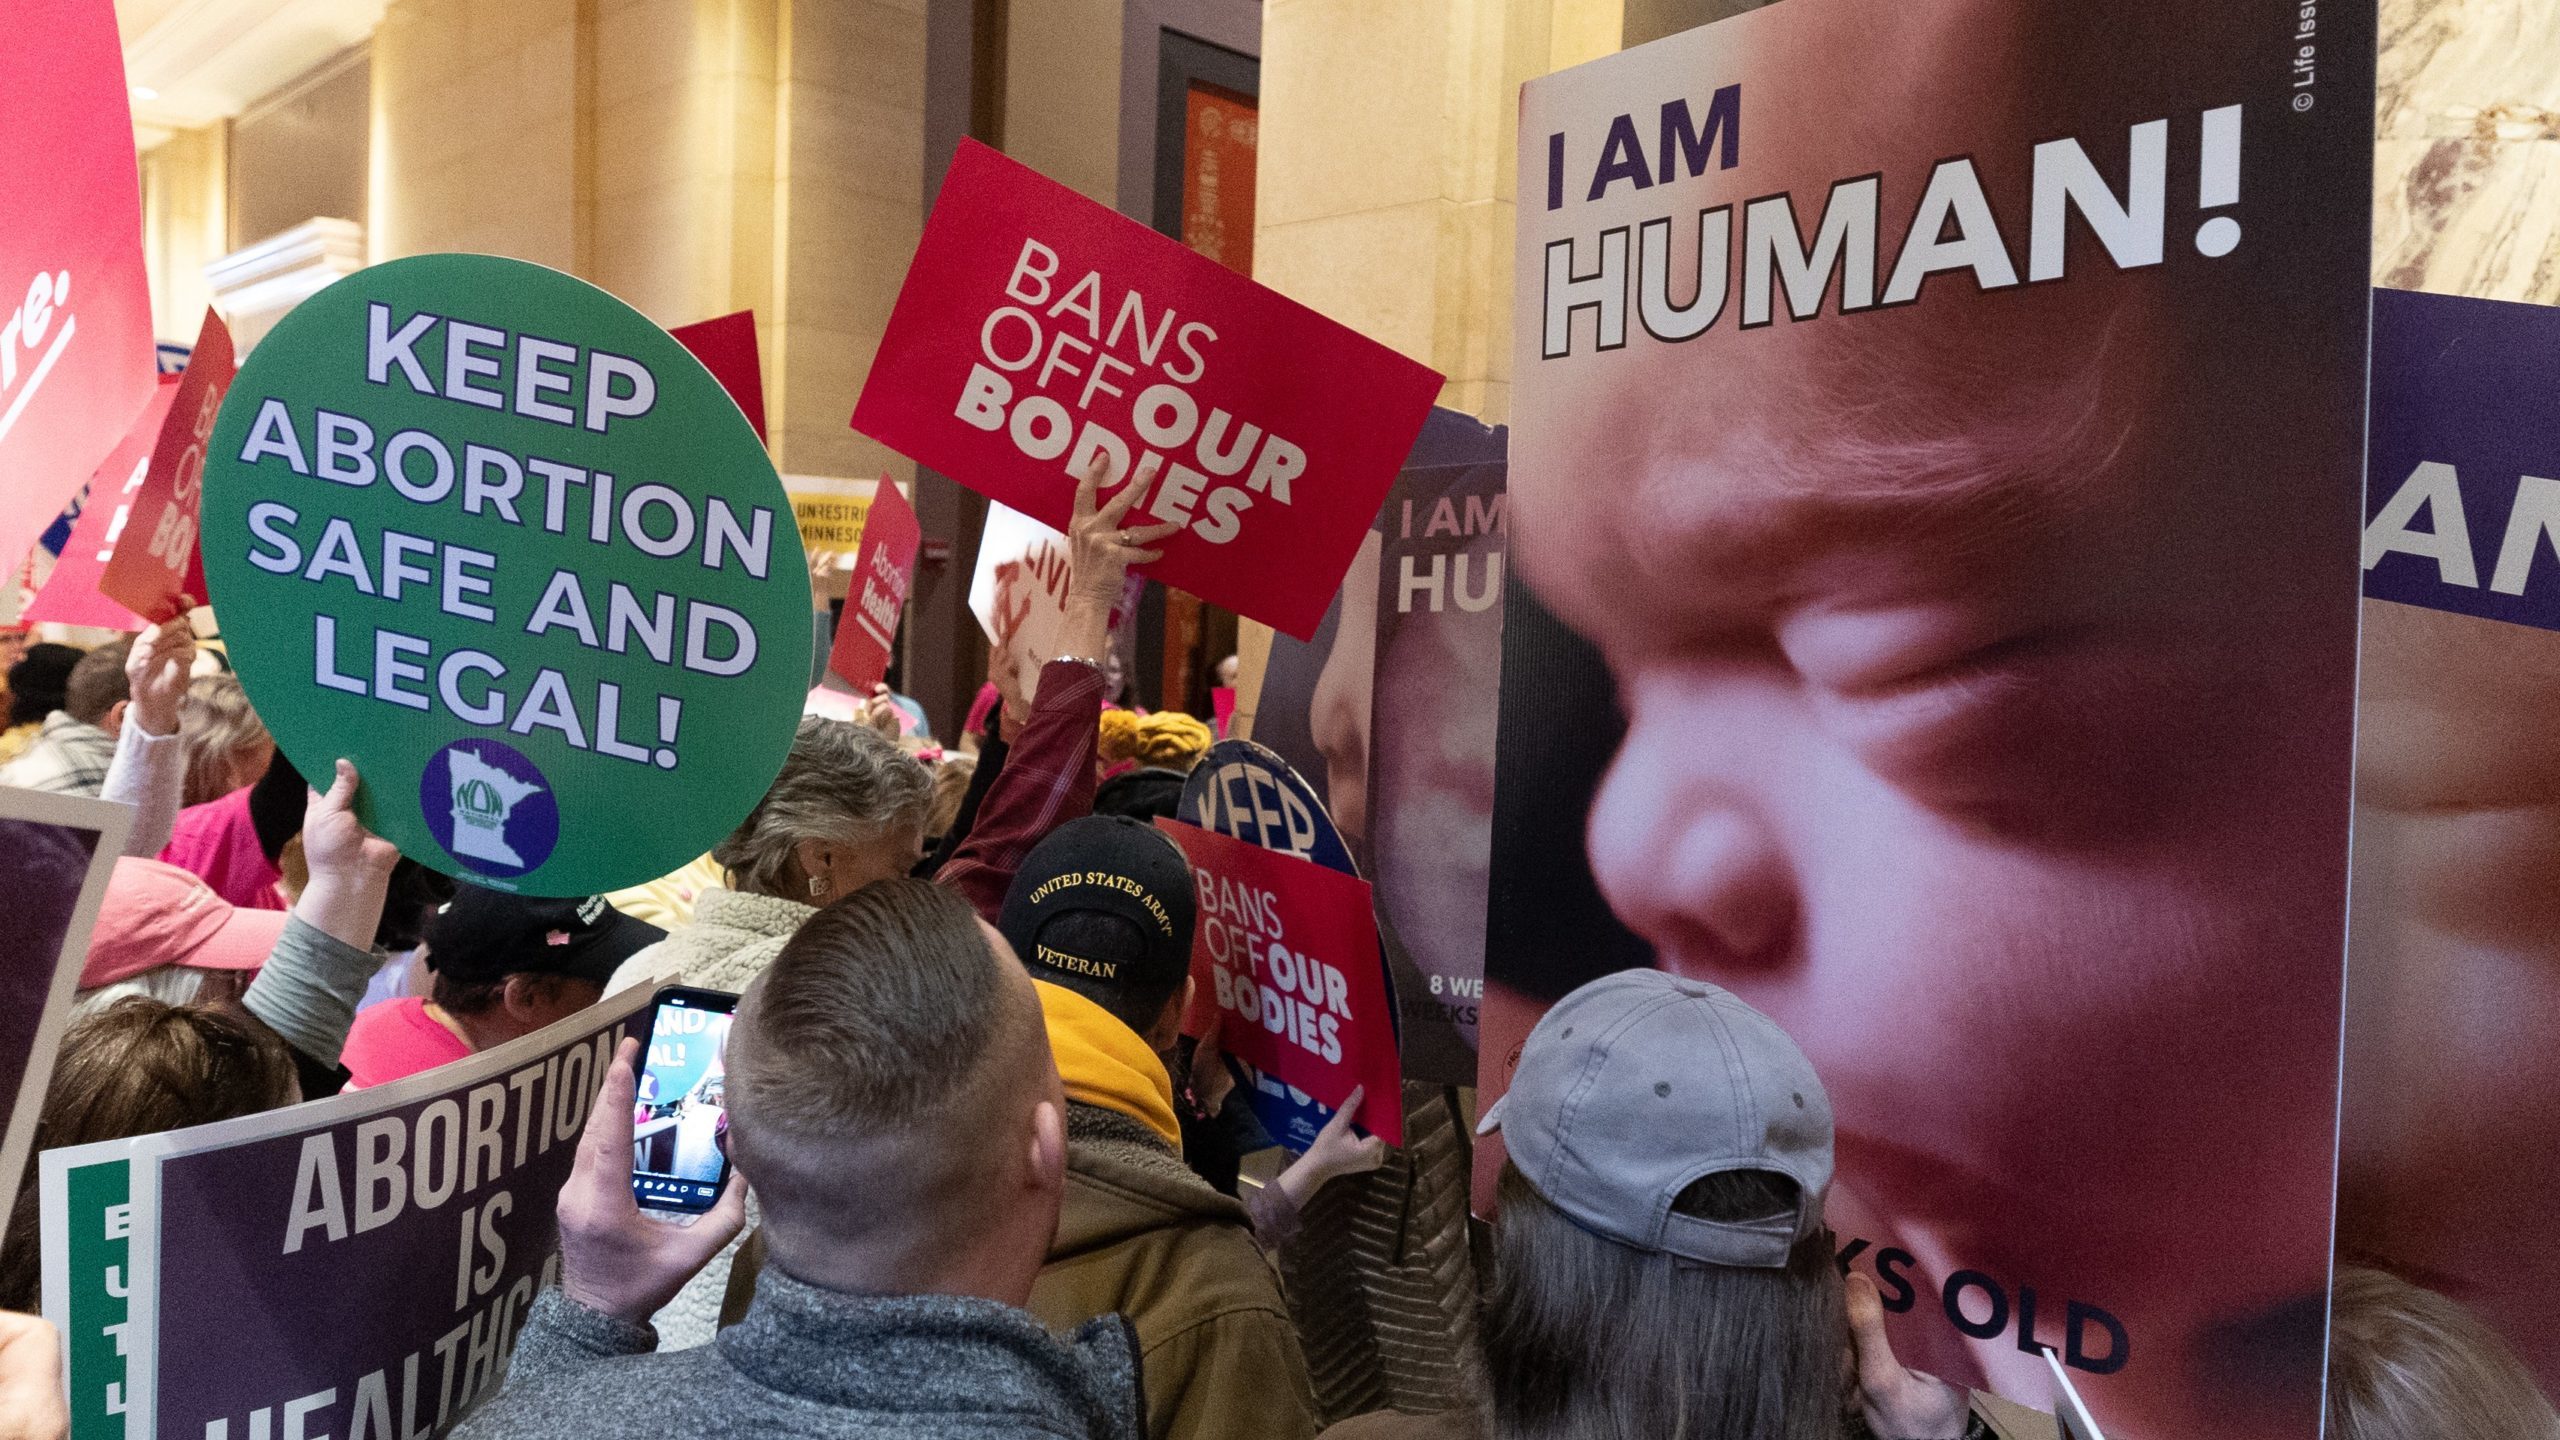 Over Catholic protests, Minnesota lawmakers enact right to abortion law